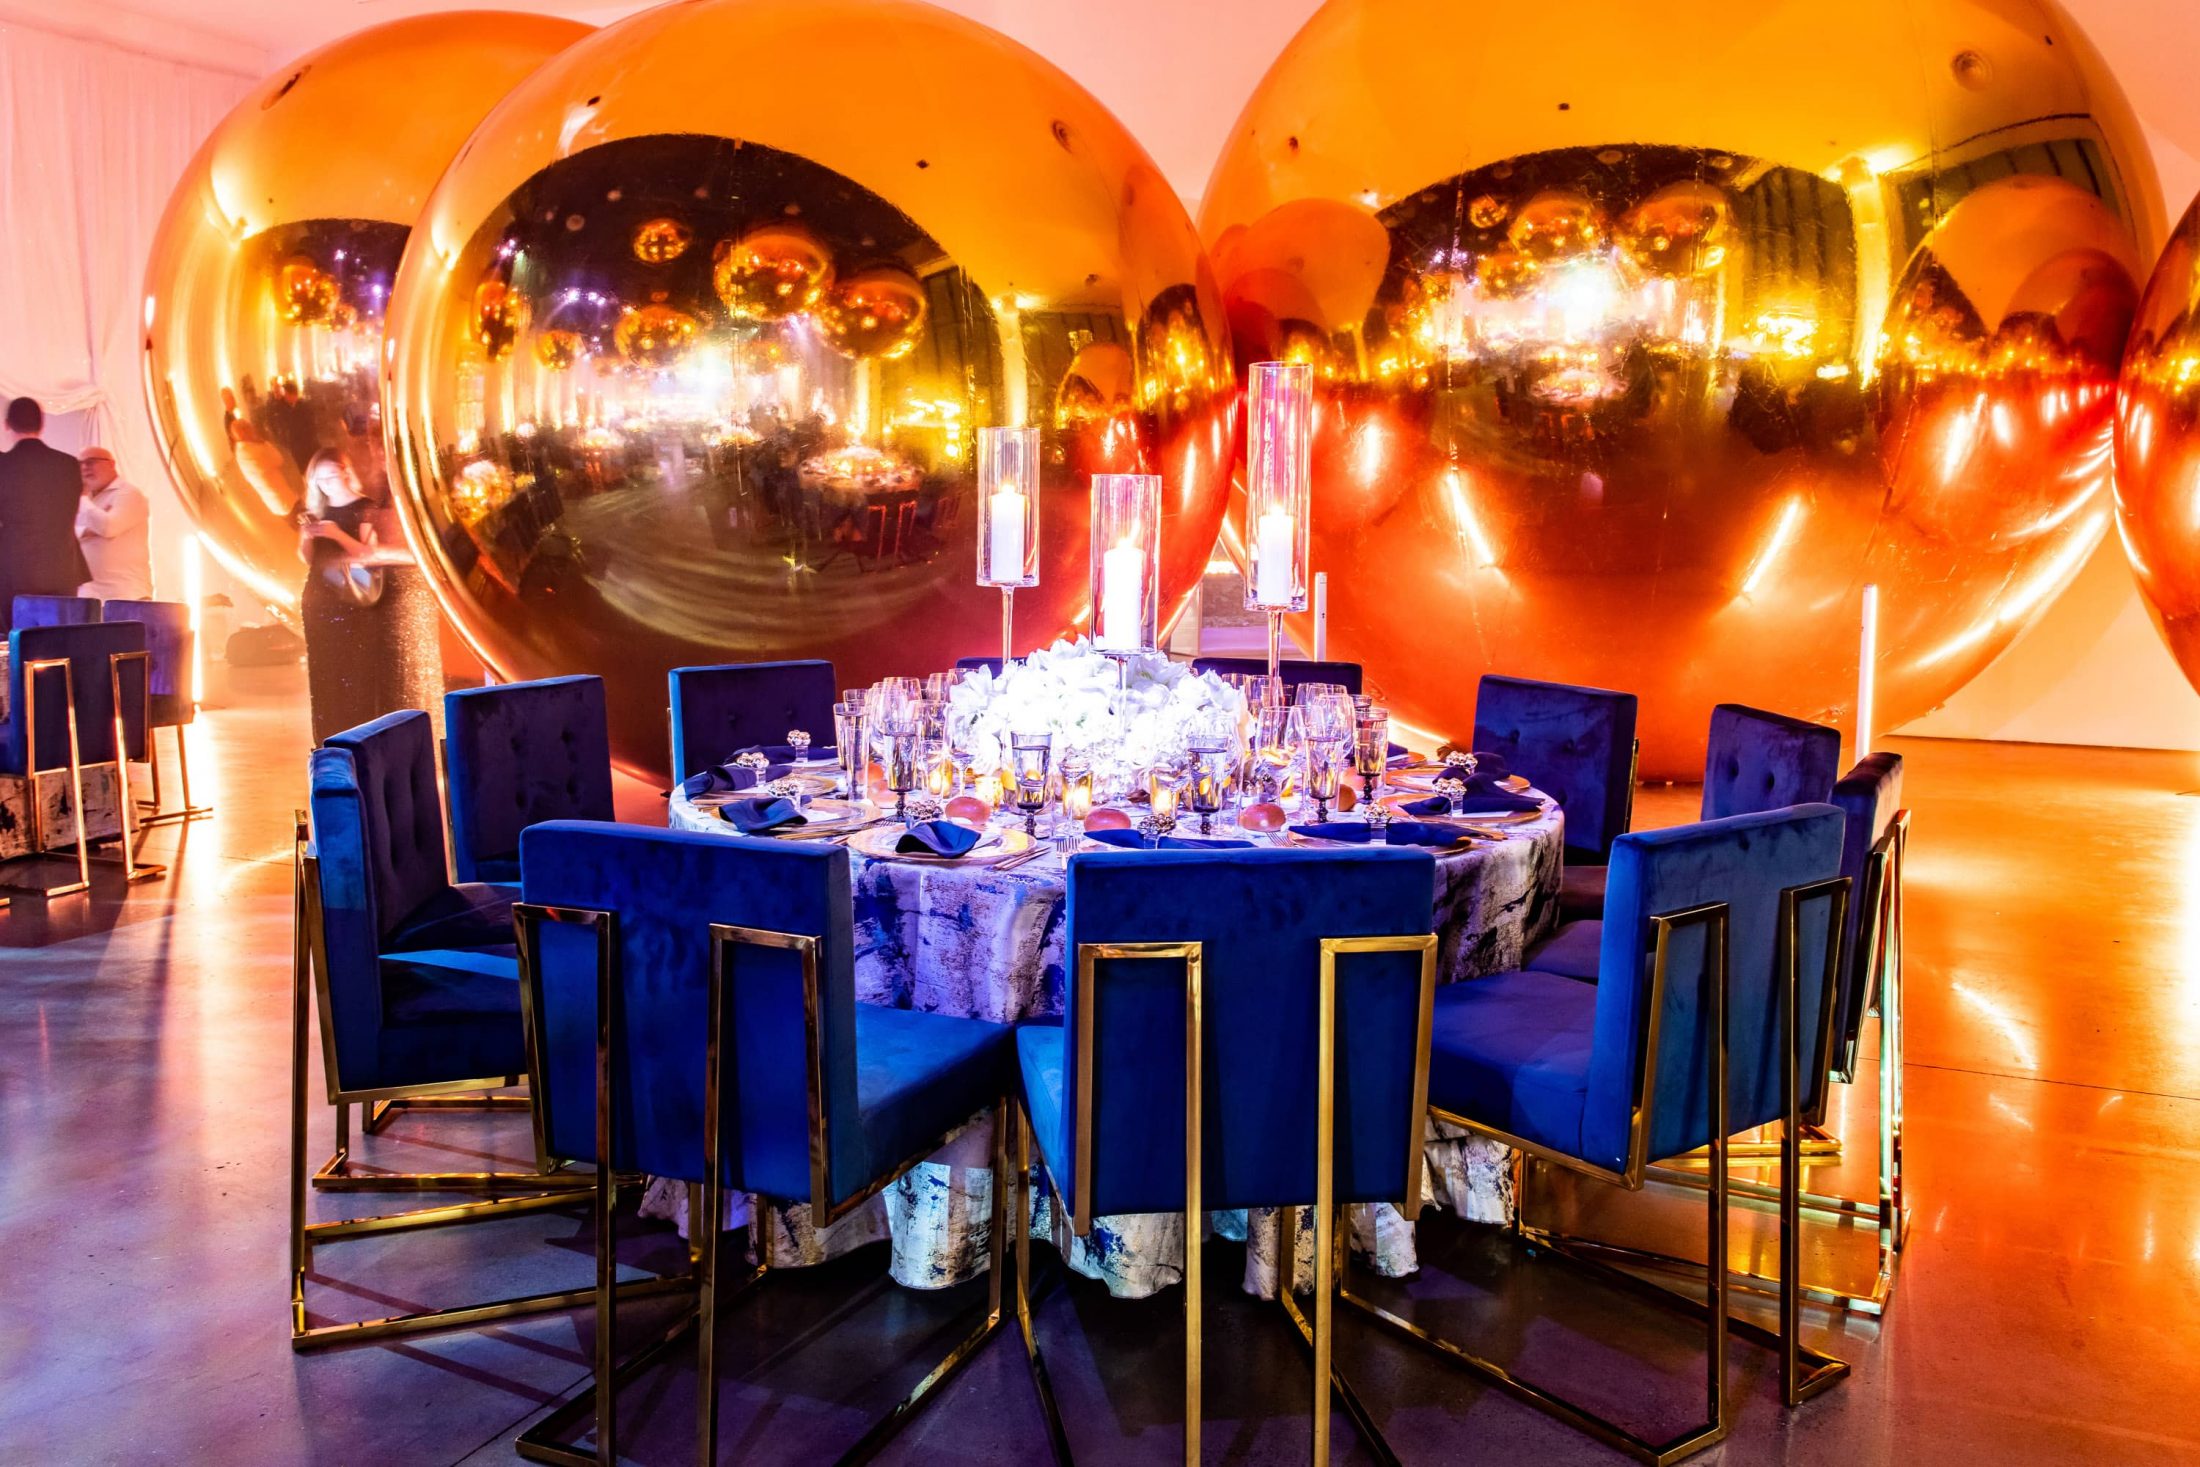 Chic table set-up at champagne bottle-inspired reception at this NYE wedding in New York City | Photo by Gruber Photo